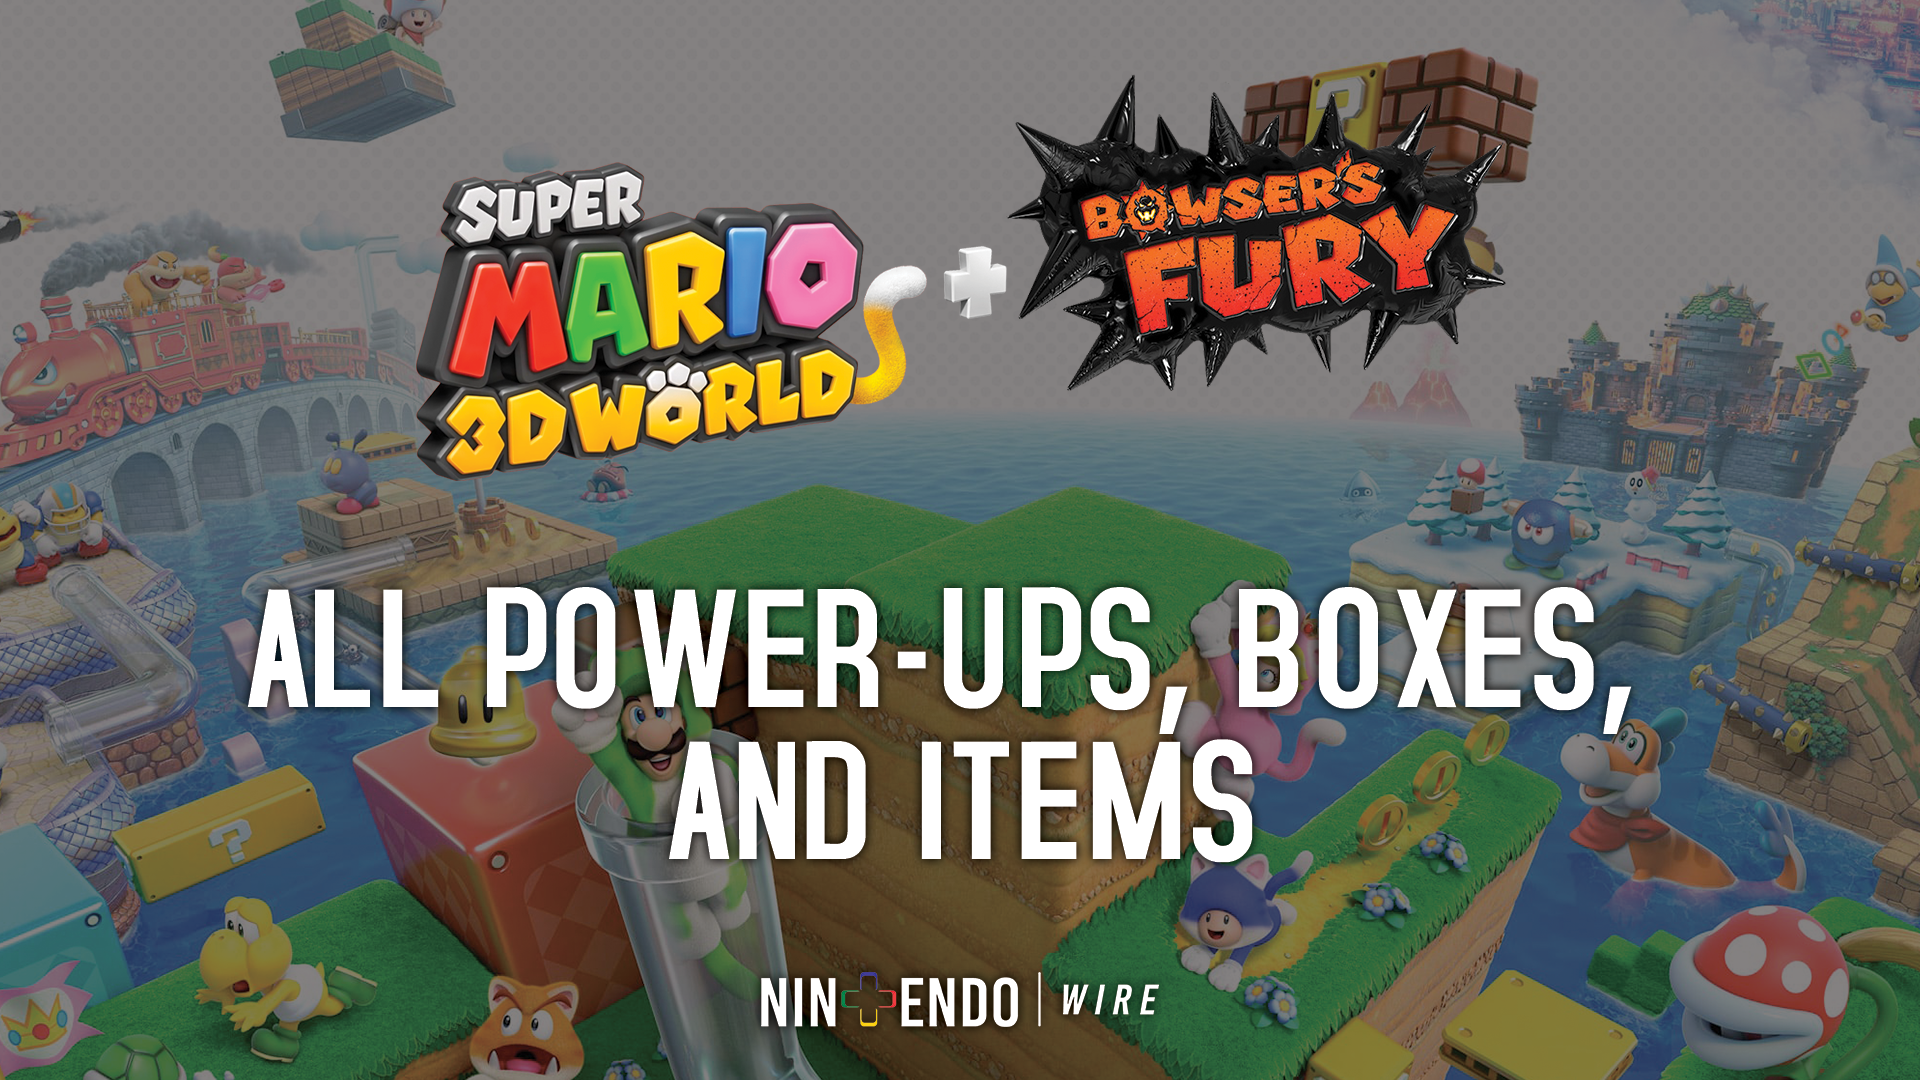 Super Mario 3d World Bowser S Fury Power Ups Boxes And Items